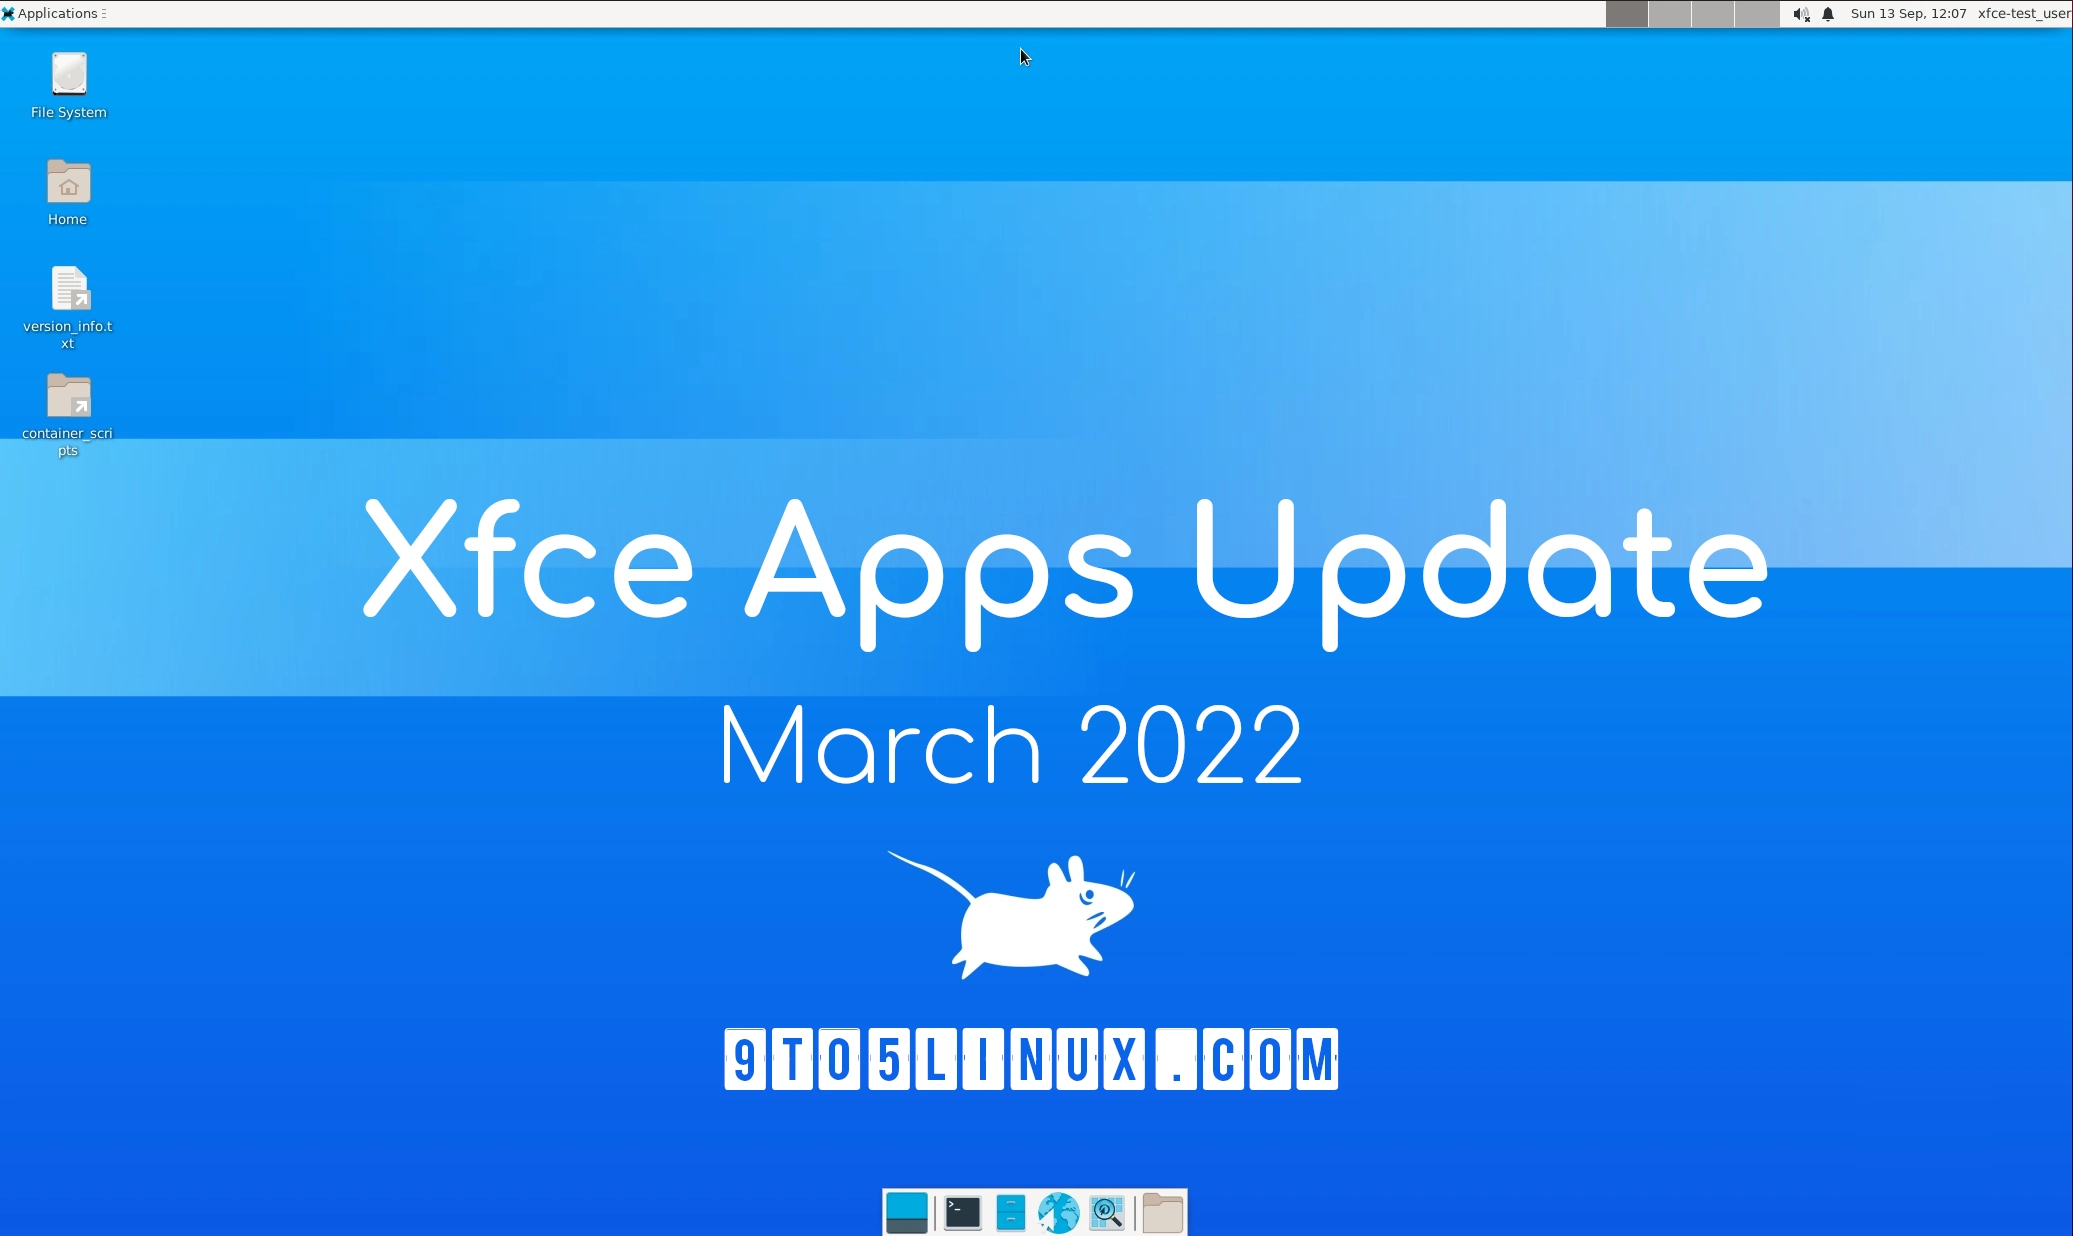 Xfce’s Apps Update for March 2022: New Releases of Orange, Xfdashboard, Xfce Terminal